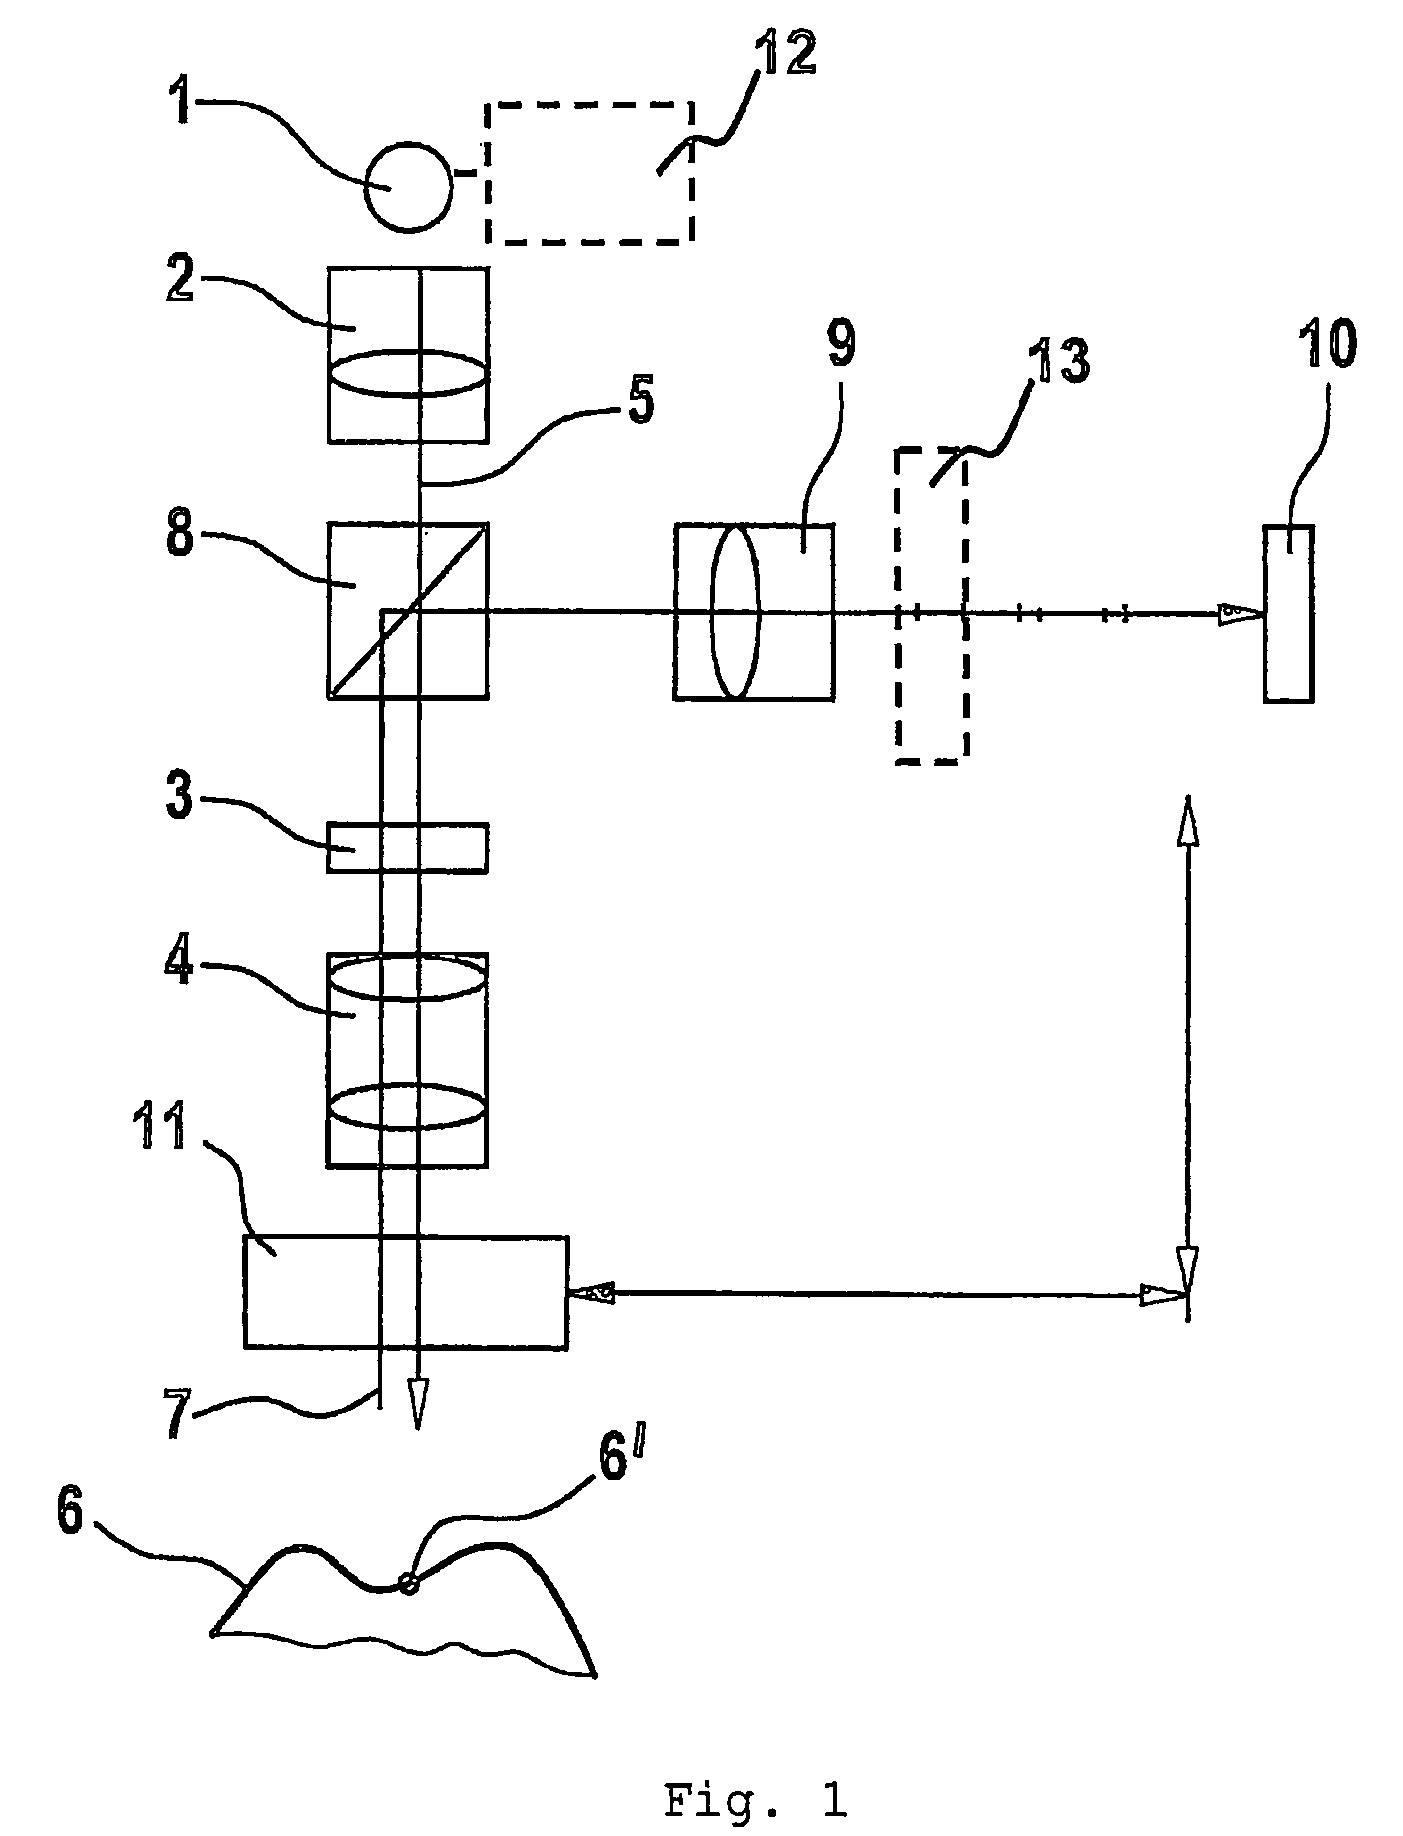 Measuring device and method that operates according to the basic principles of confocal microscopy